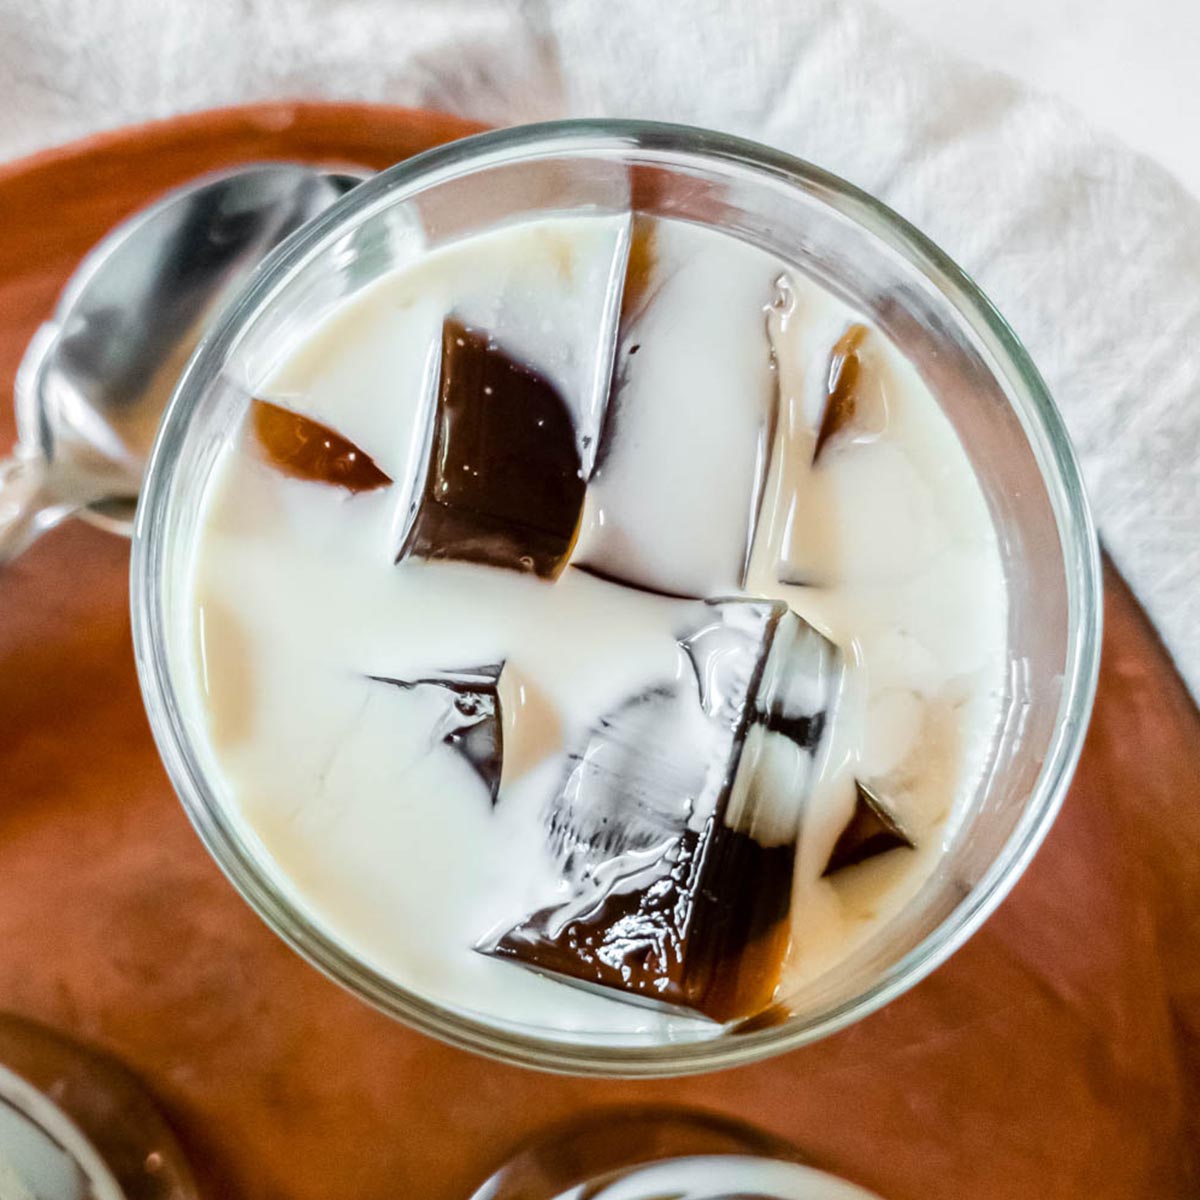 A picture of coffee jello in a glass with milk.